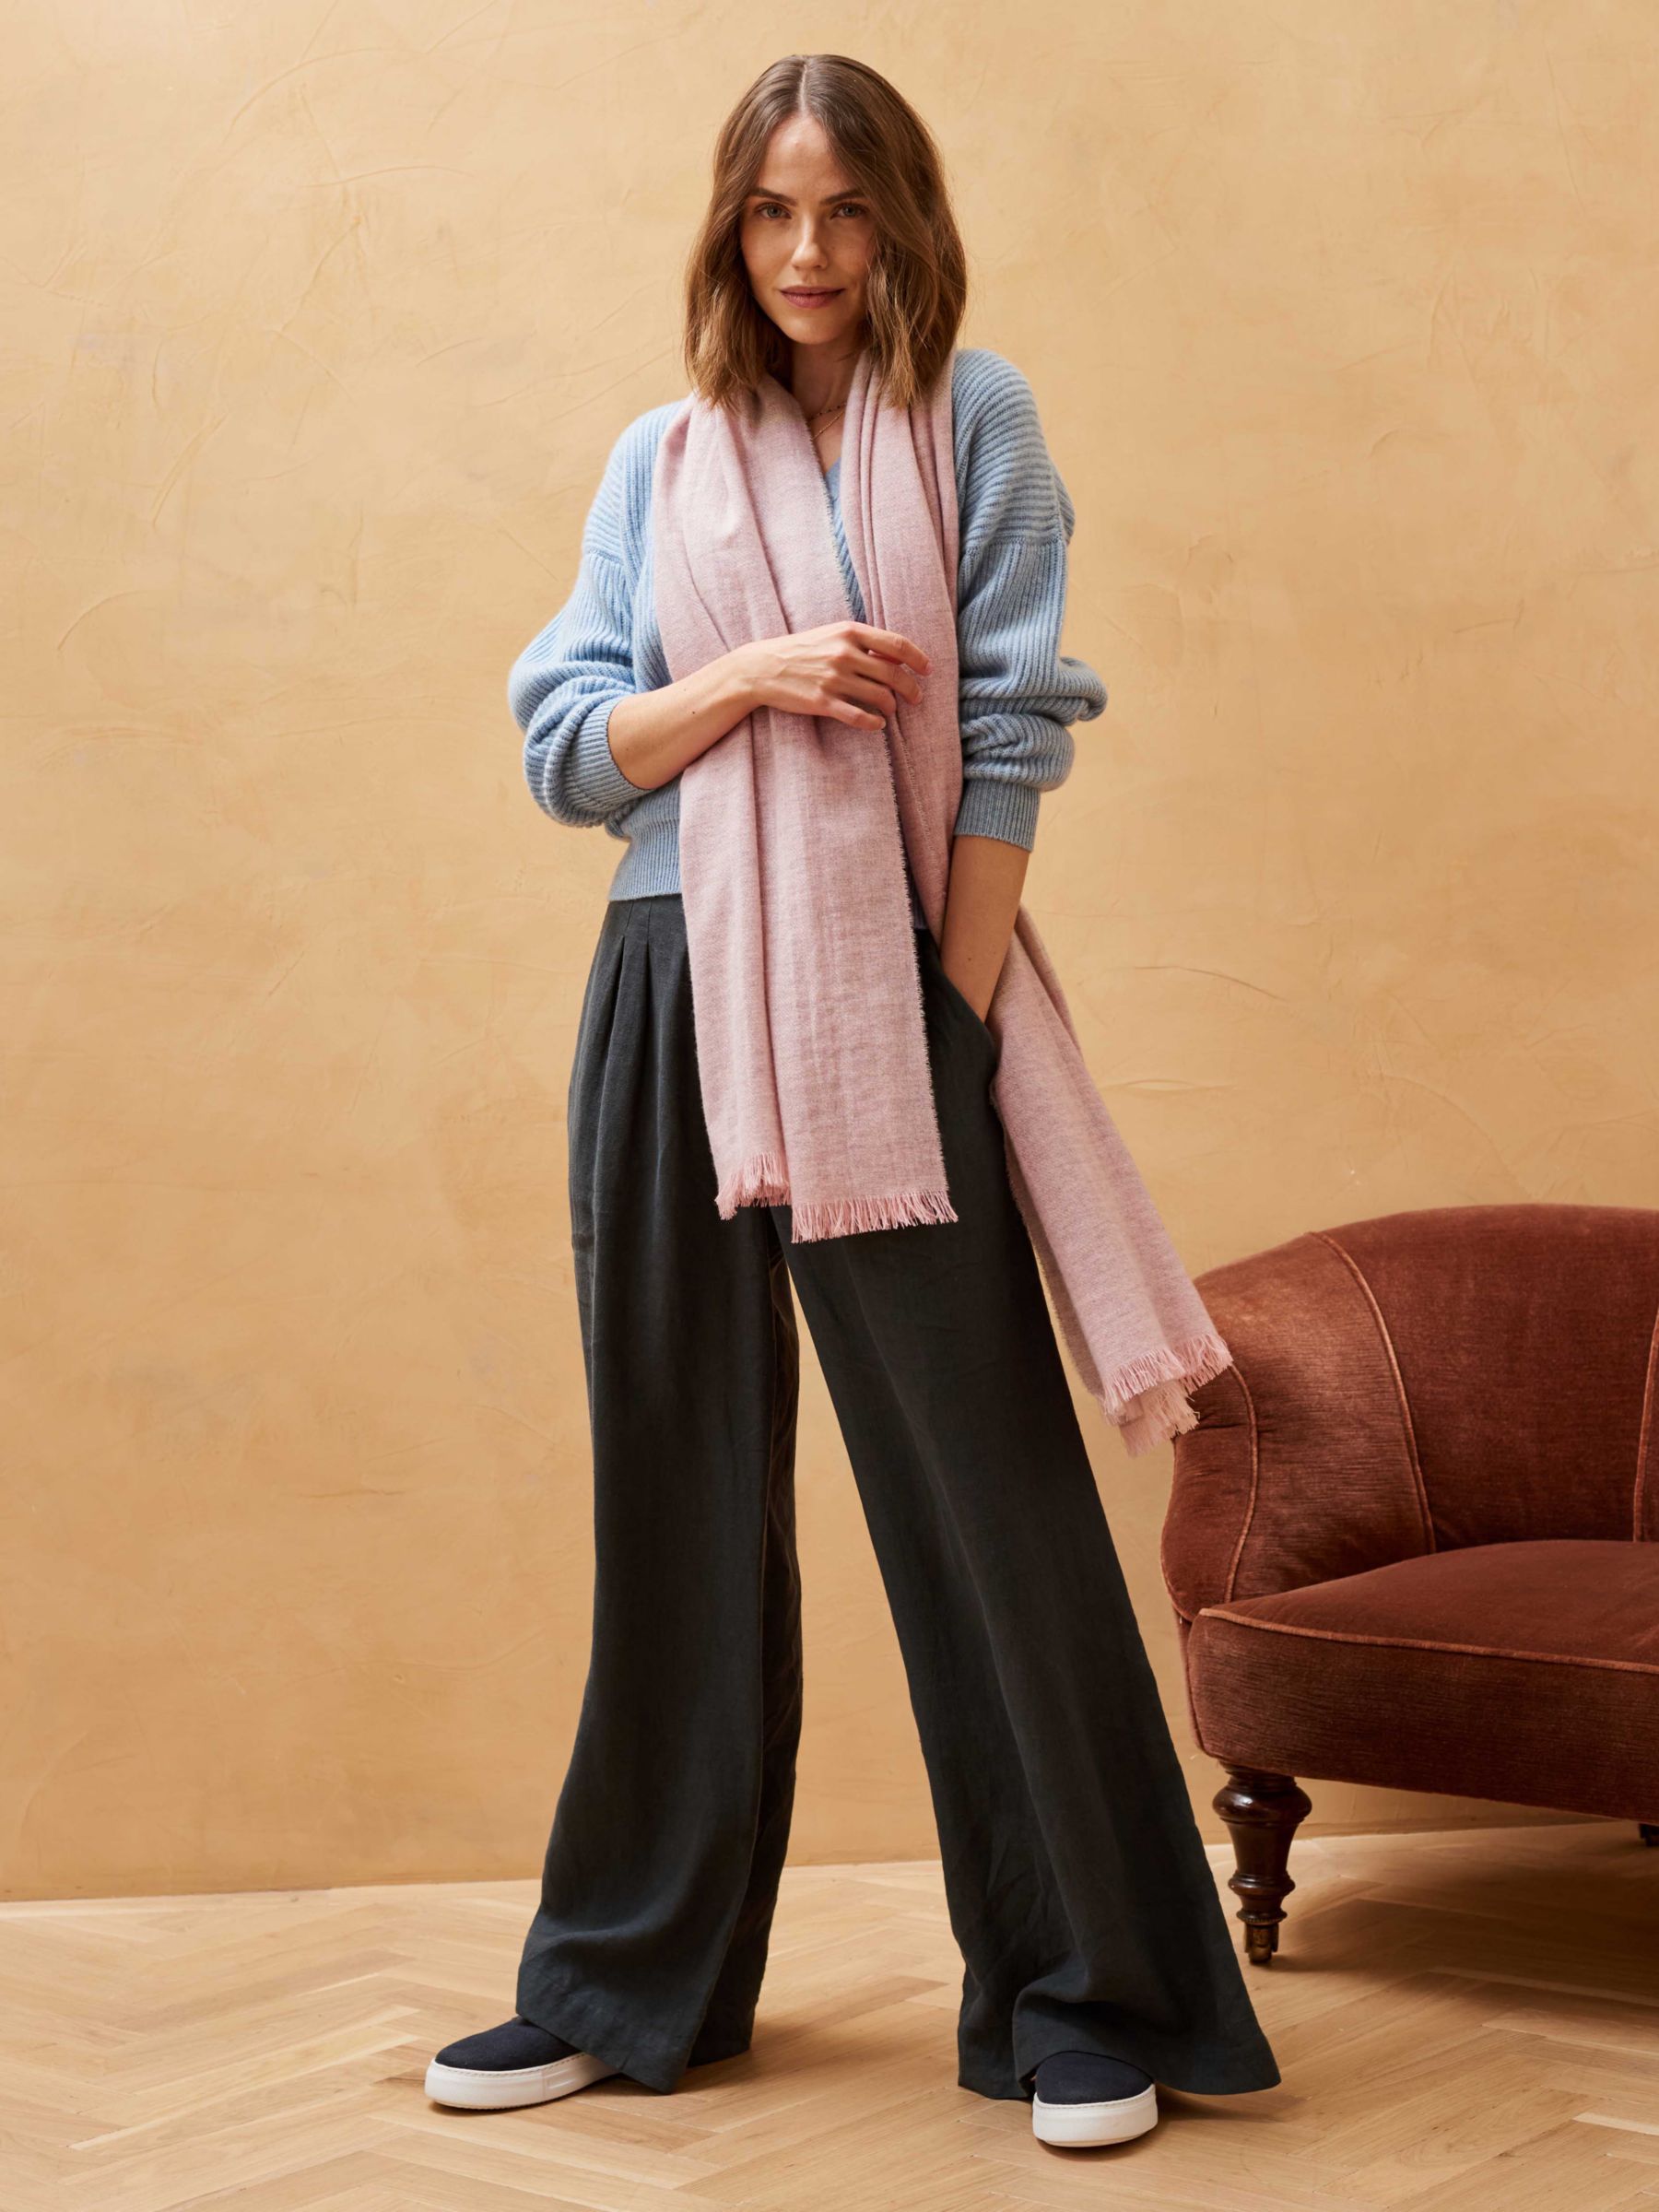 Buy Brora Cashmere Stole Scarf Online at johnlewis.com